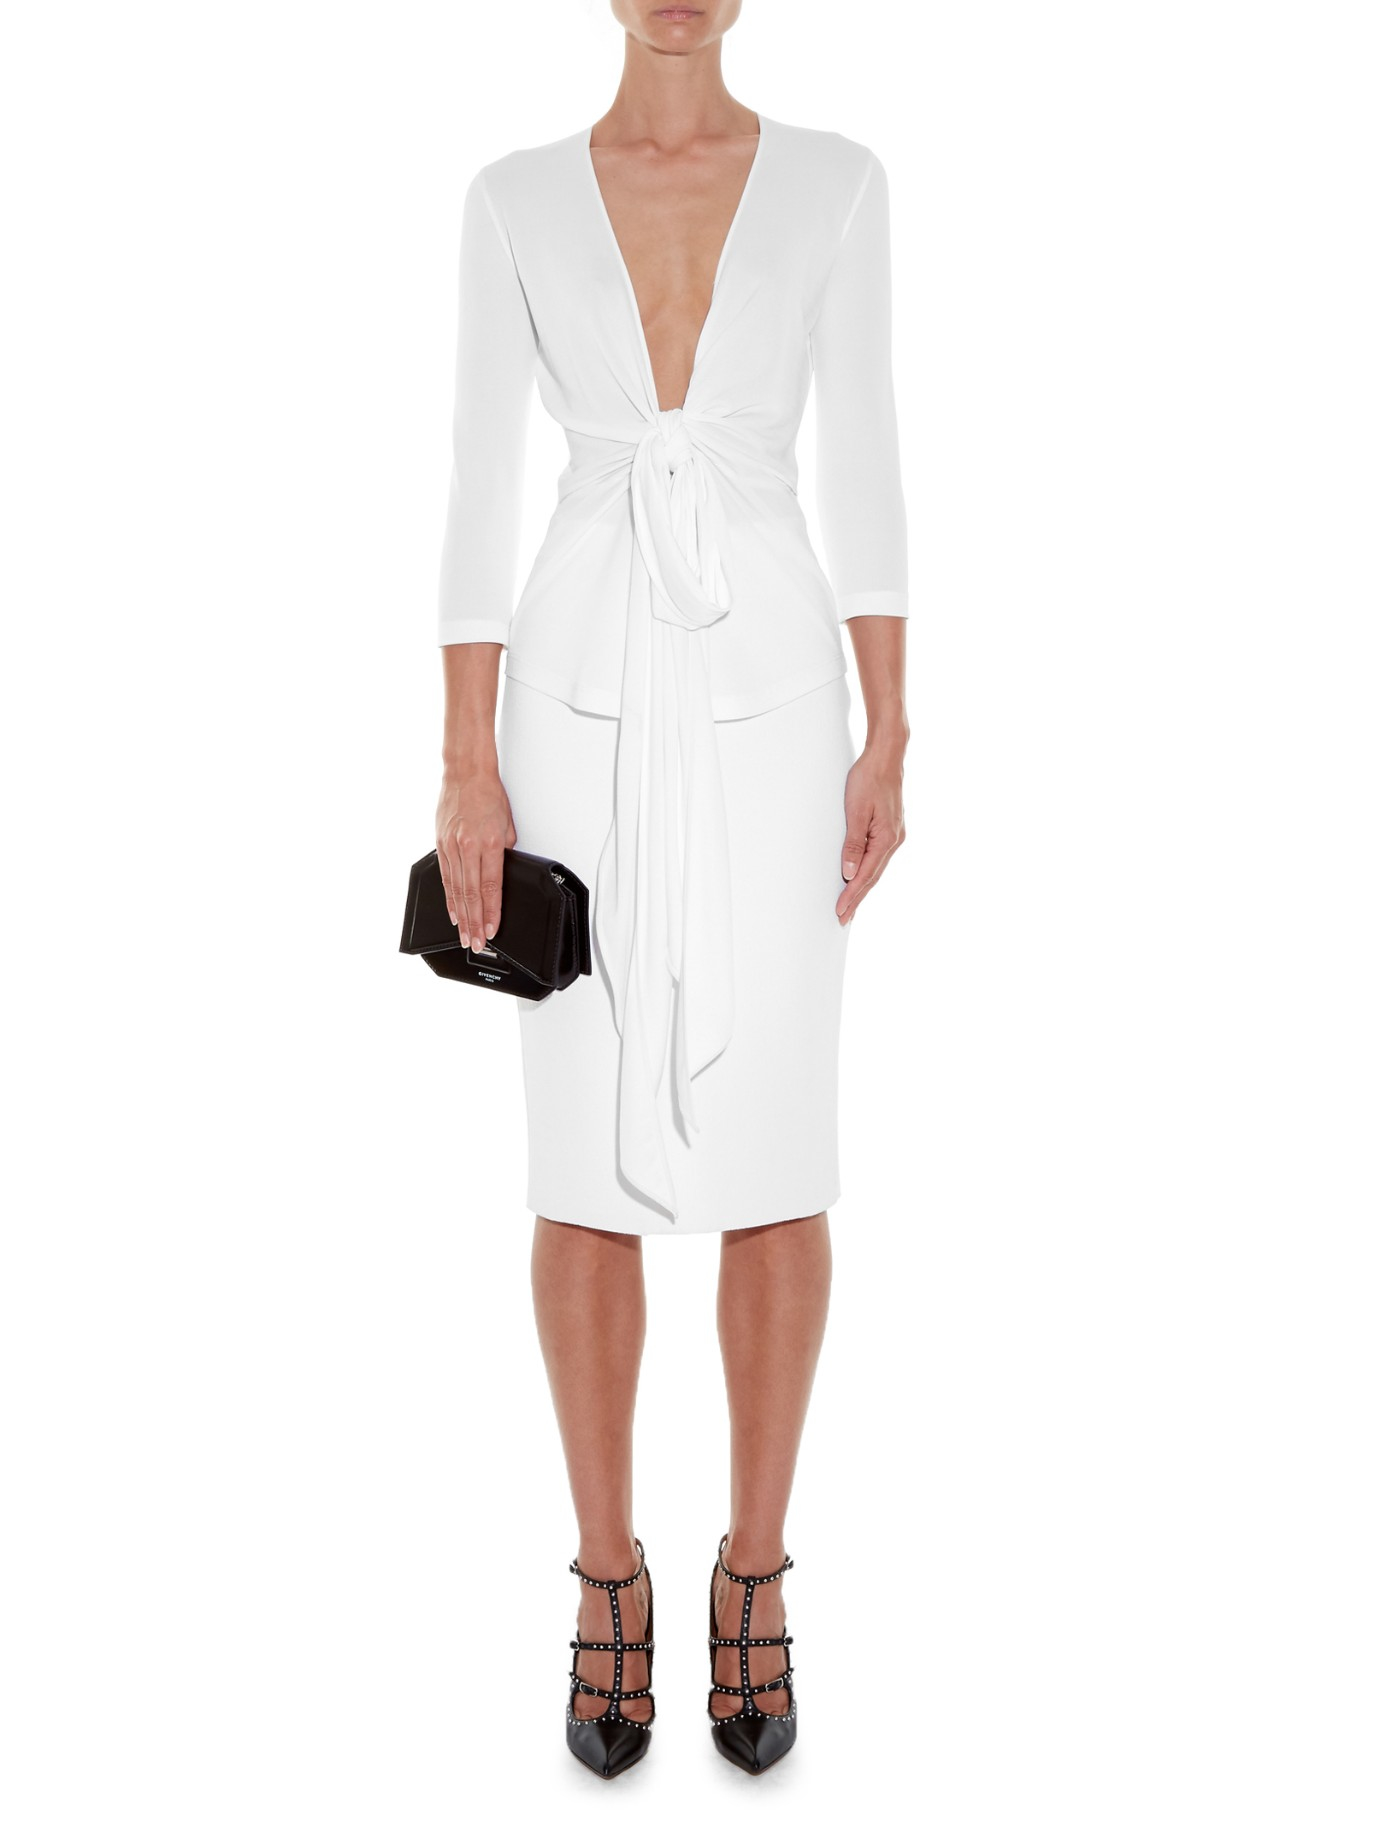 Lyst - Givenchy Button-back Pencil Skirt in White